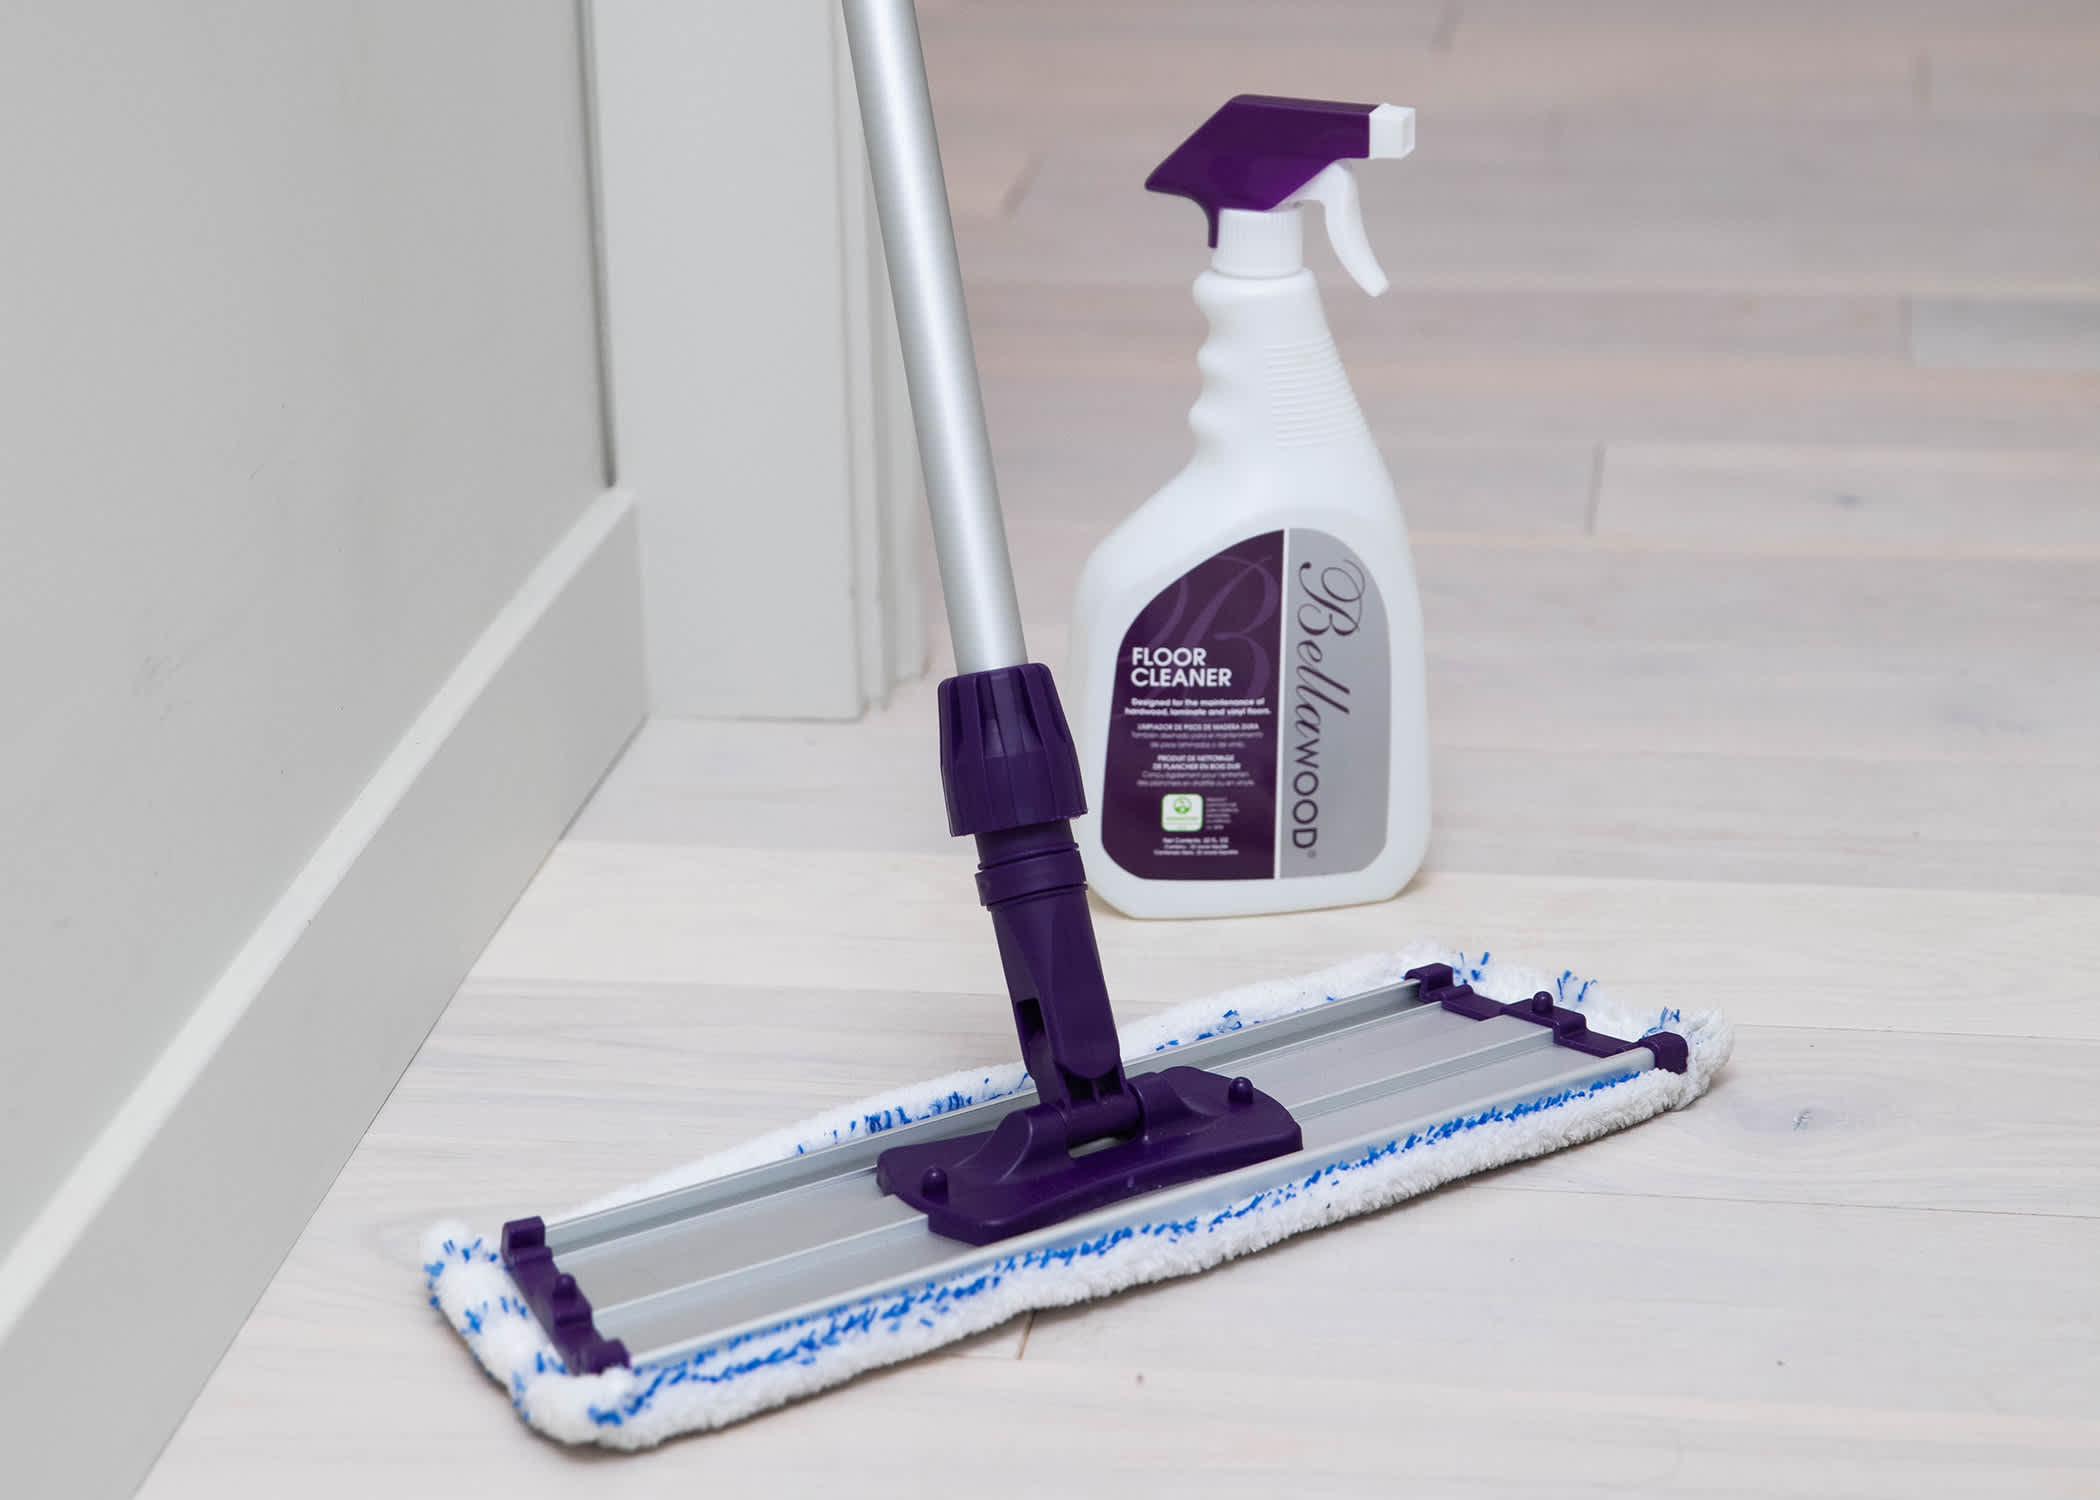 cleaning supplies including spray bottle and cleaning pad on mop